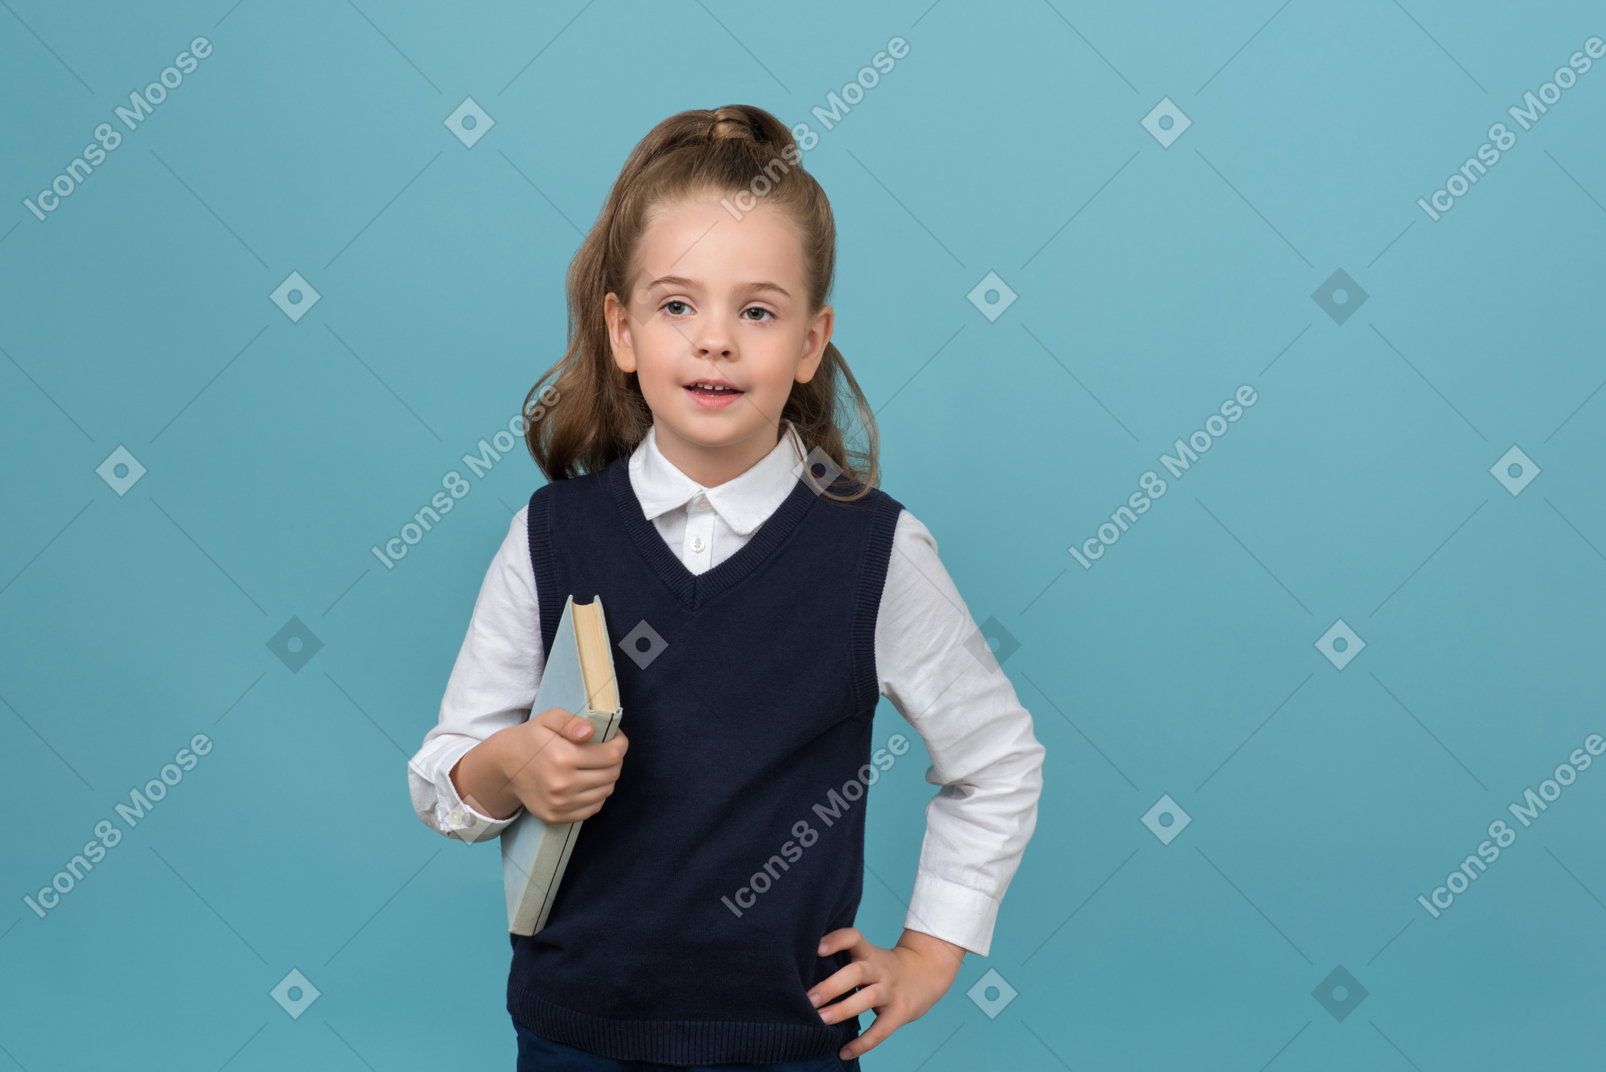 Little schoolgirl holding a book and pointing up something